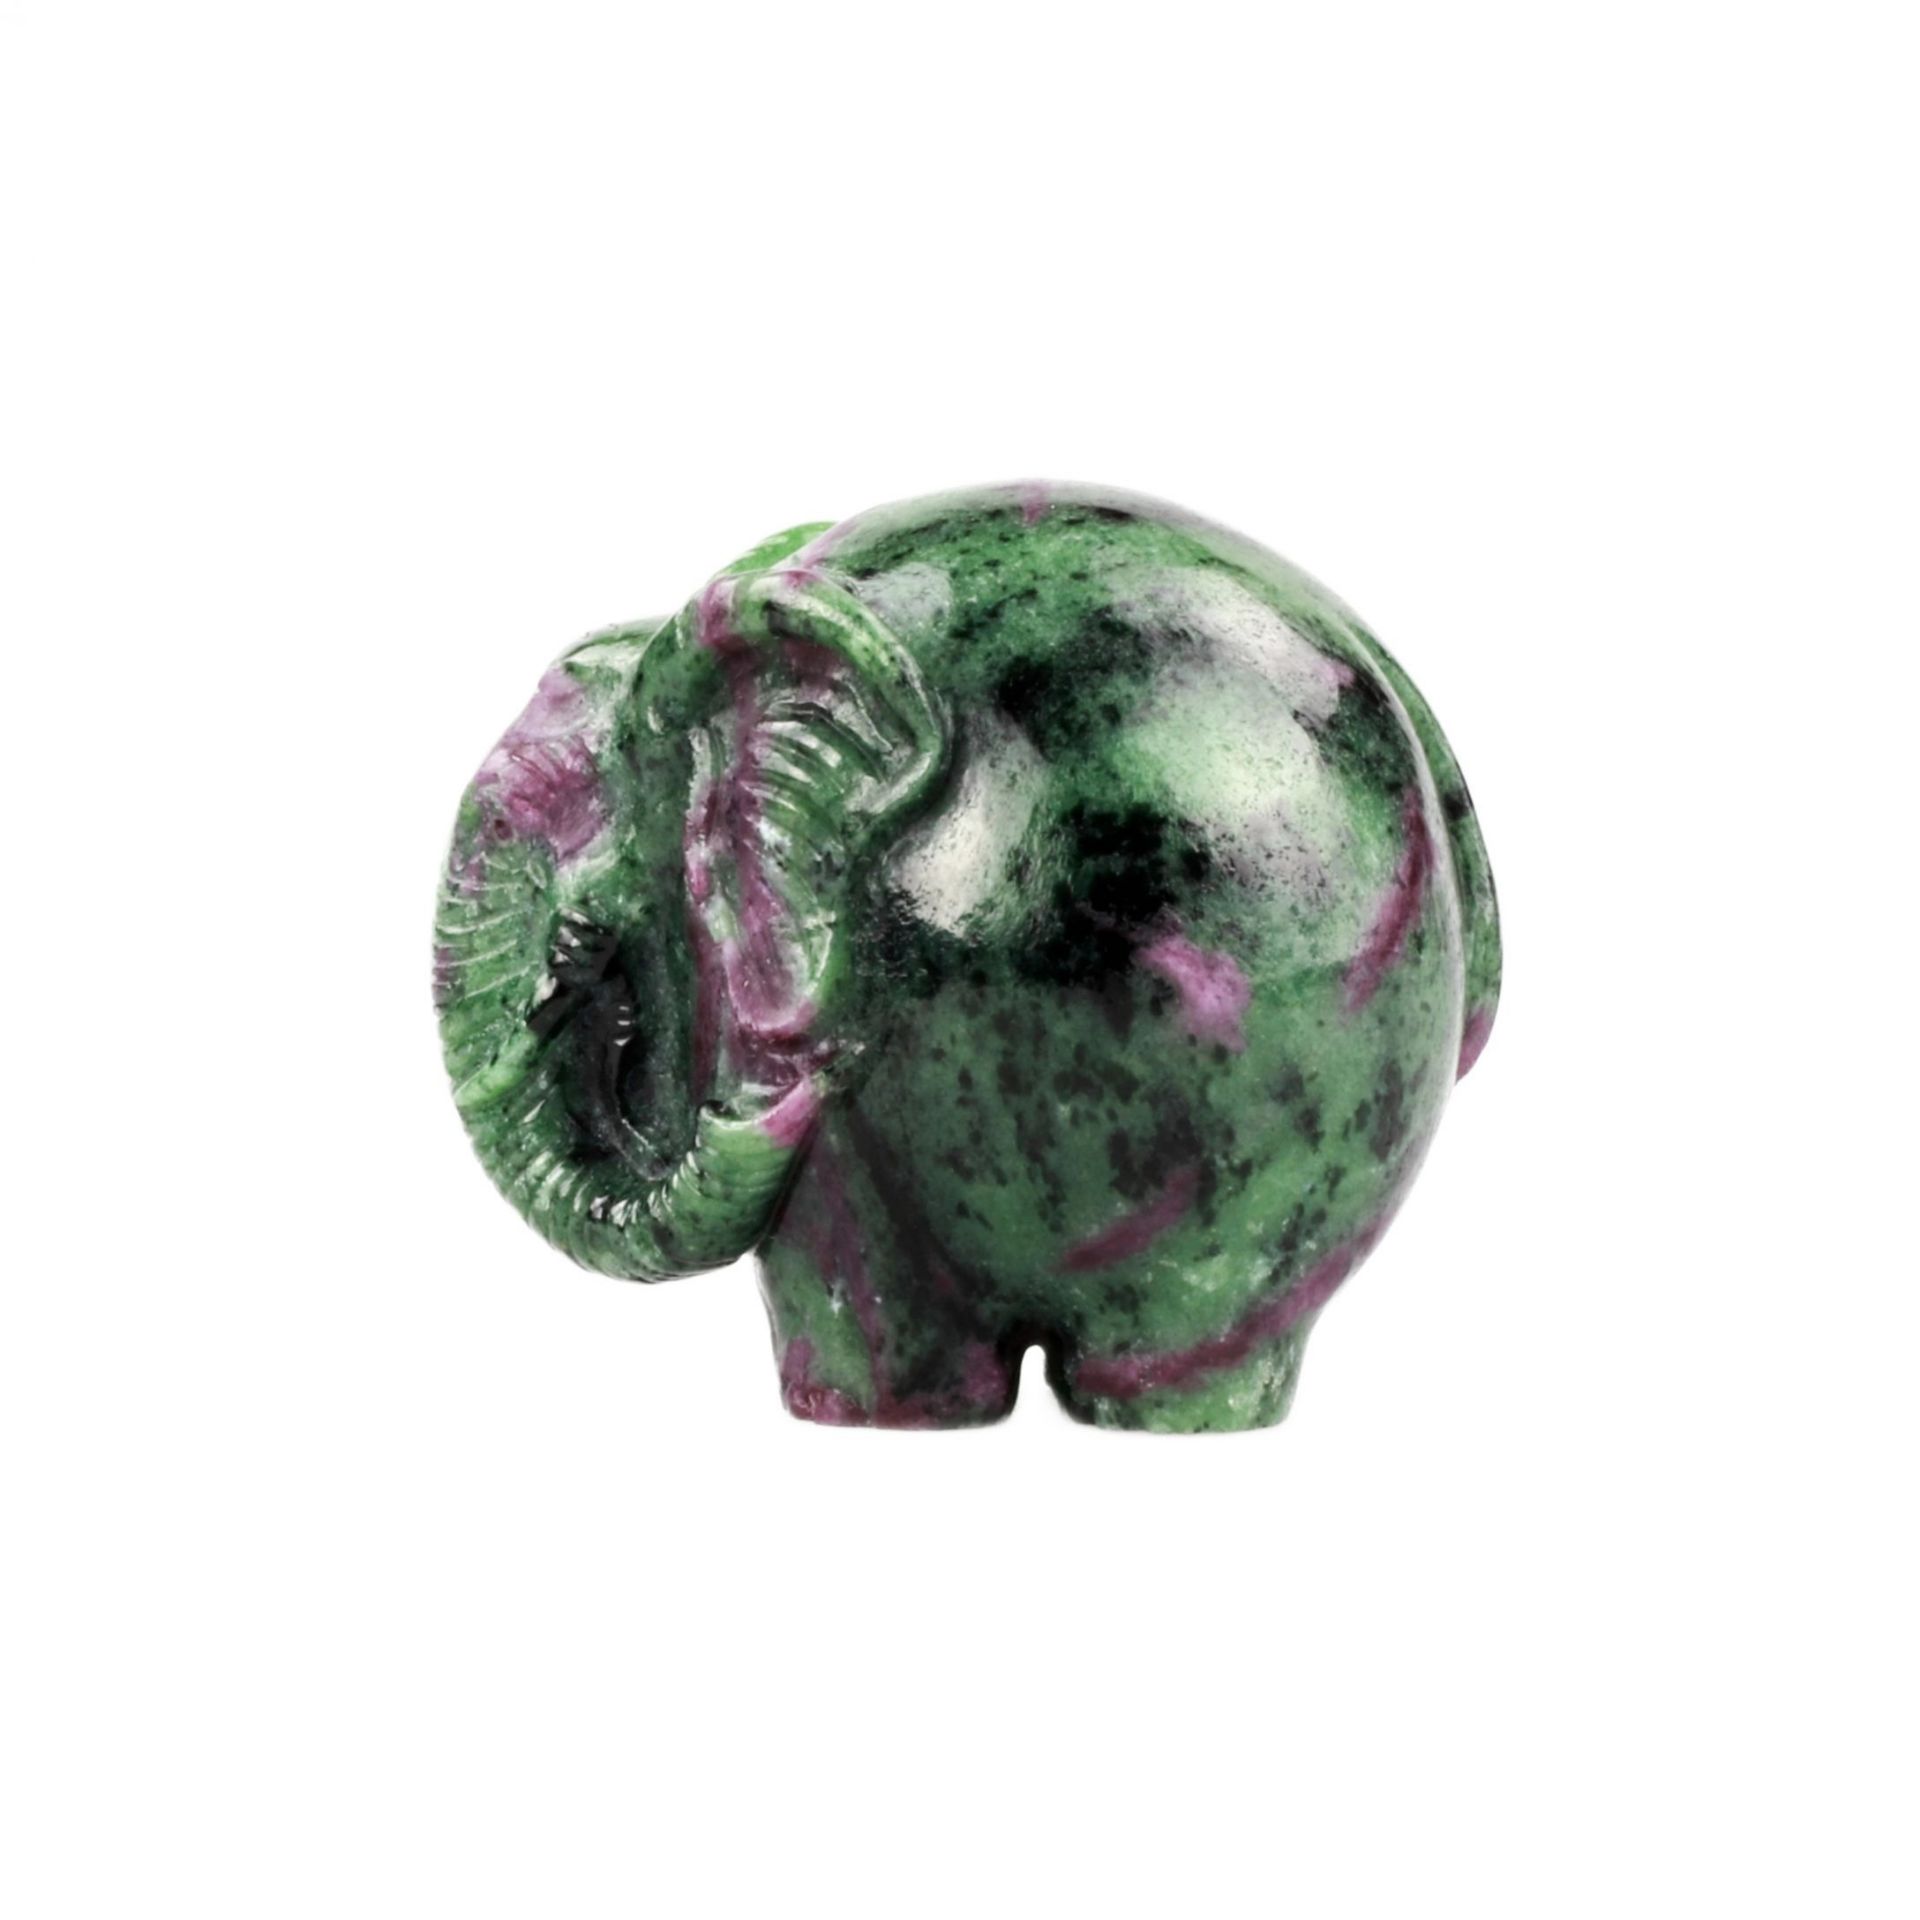 Carved figurine of an elephant in Faberge style. 20th century - Image 3 of 6